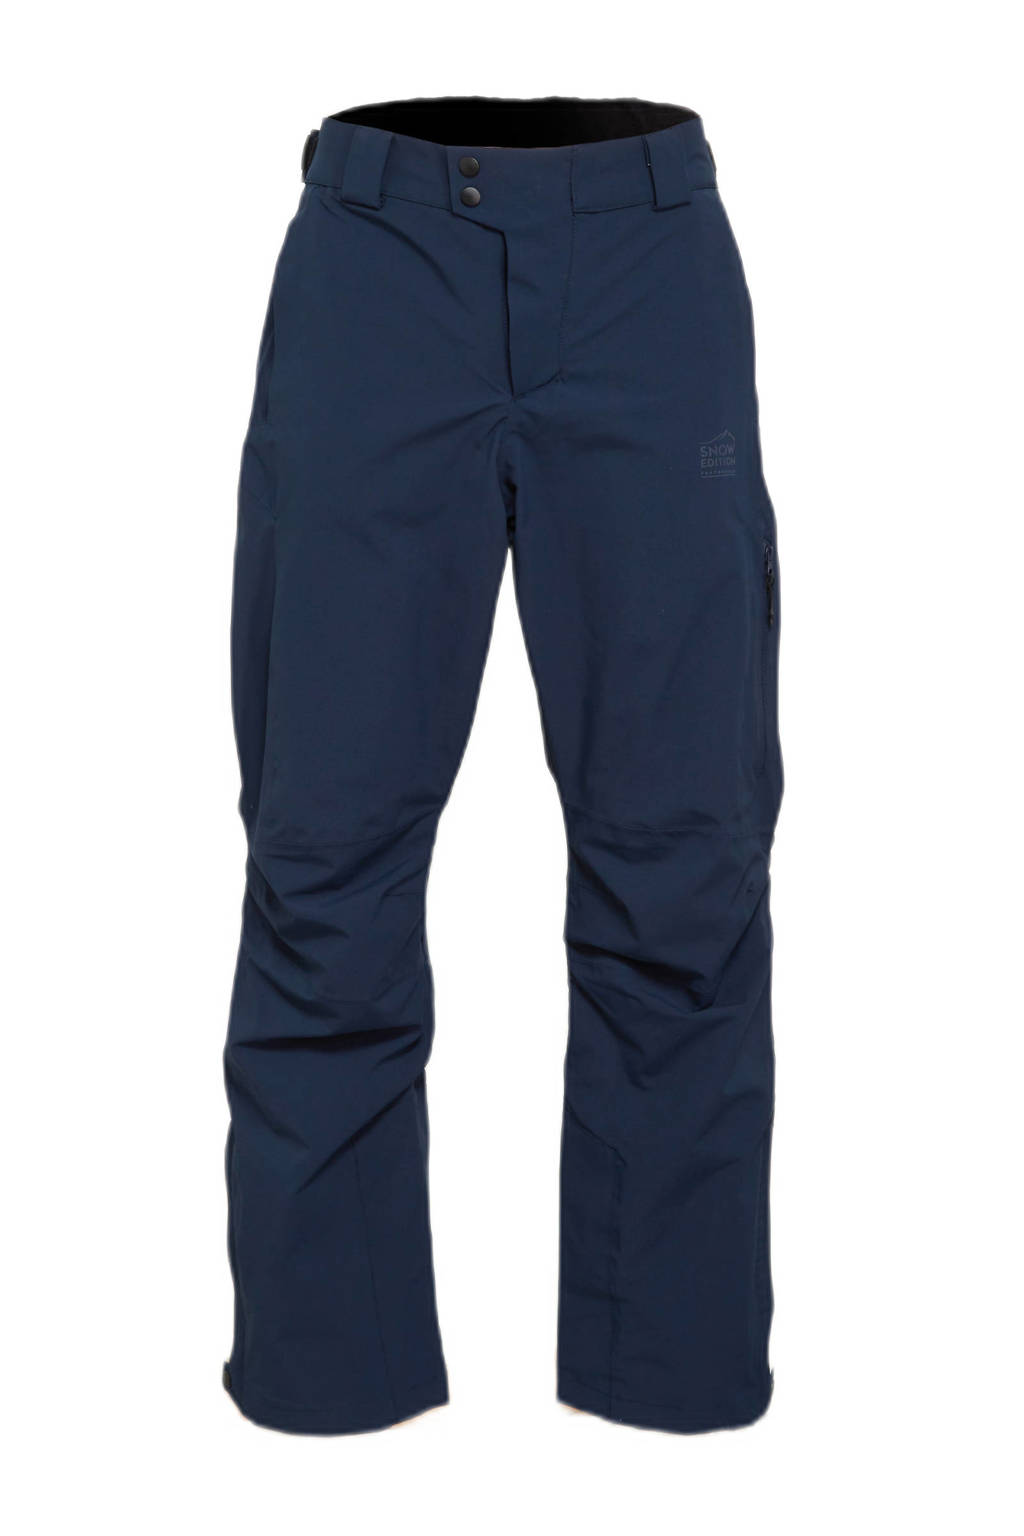 C&A Rodeo skibroek donkerblauw